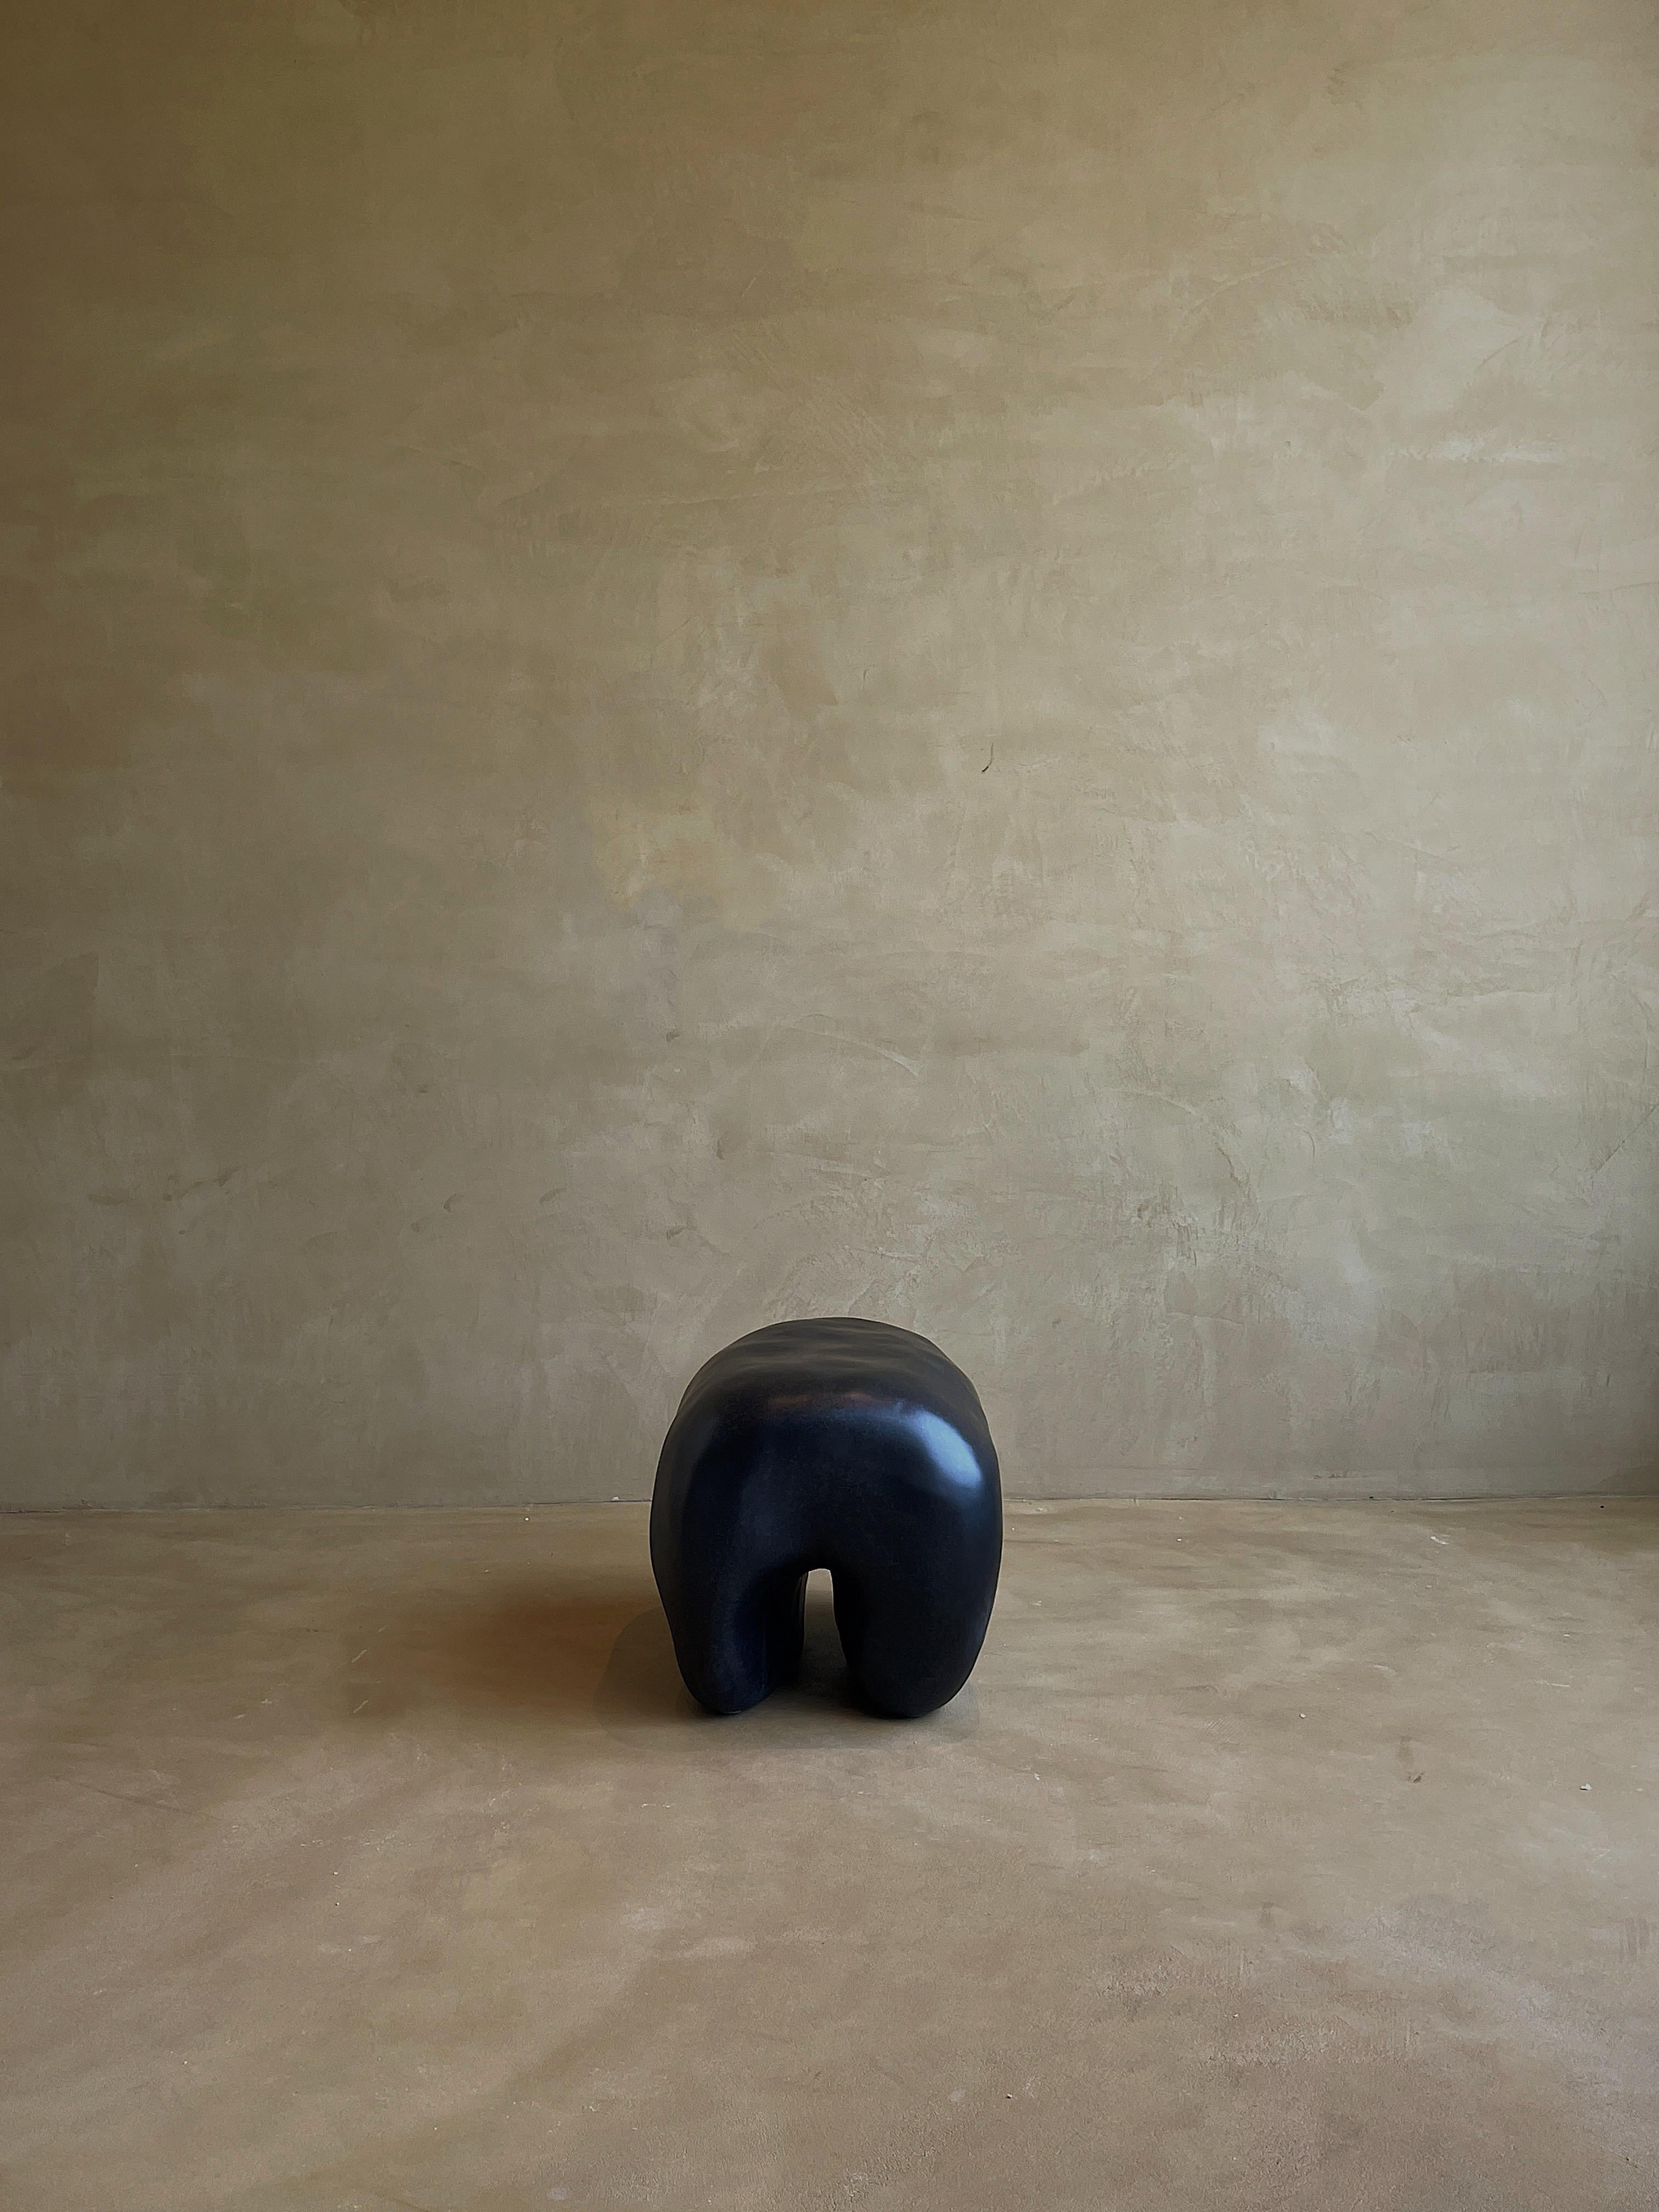 Tooth stool by kar
Dimensions: W 60 x D 45 x H 43 cm
Materials: FRP
Available in black

Kar, is the root of Sanskrit Karma, meaning karmic repetition. We seek the cause and effect in aesthetics, inspired from the past, the present, and the future,